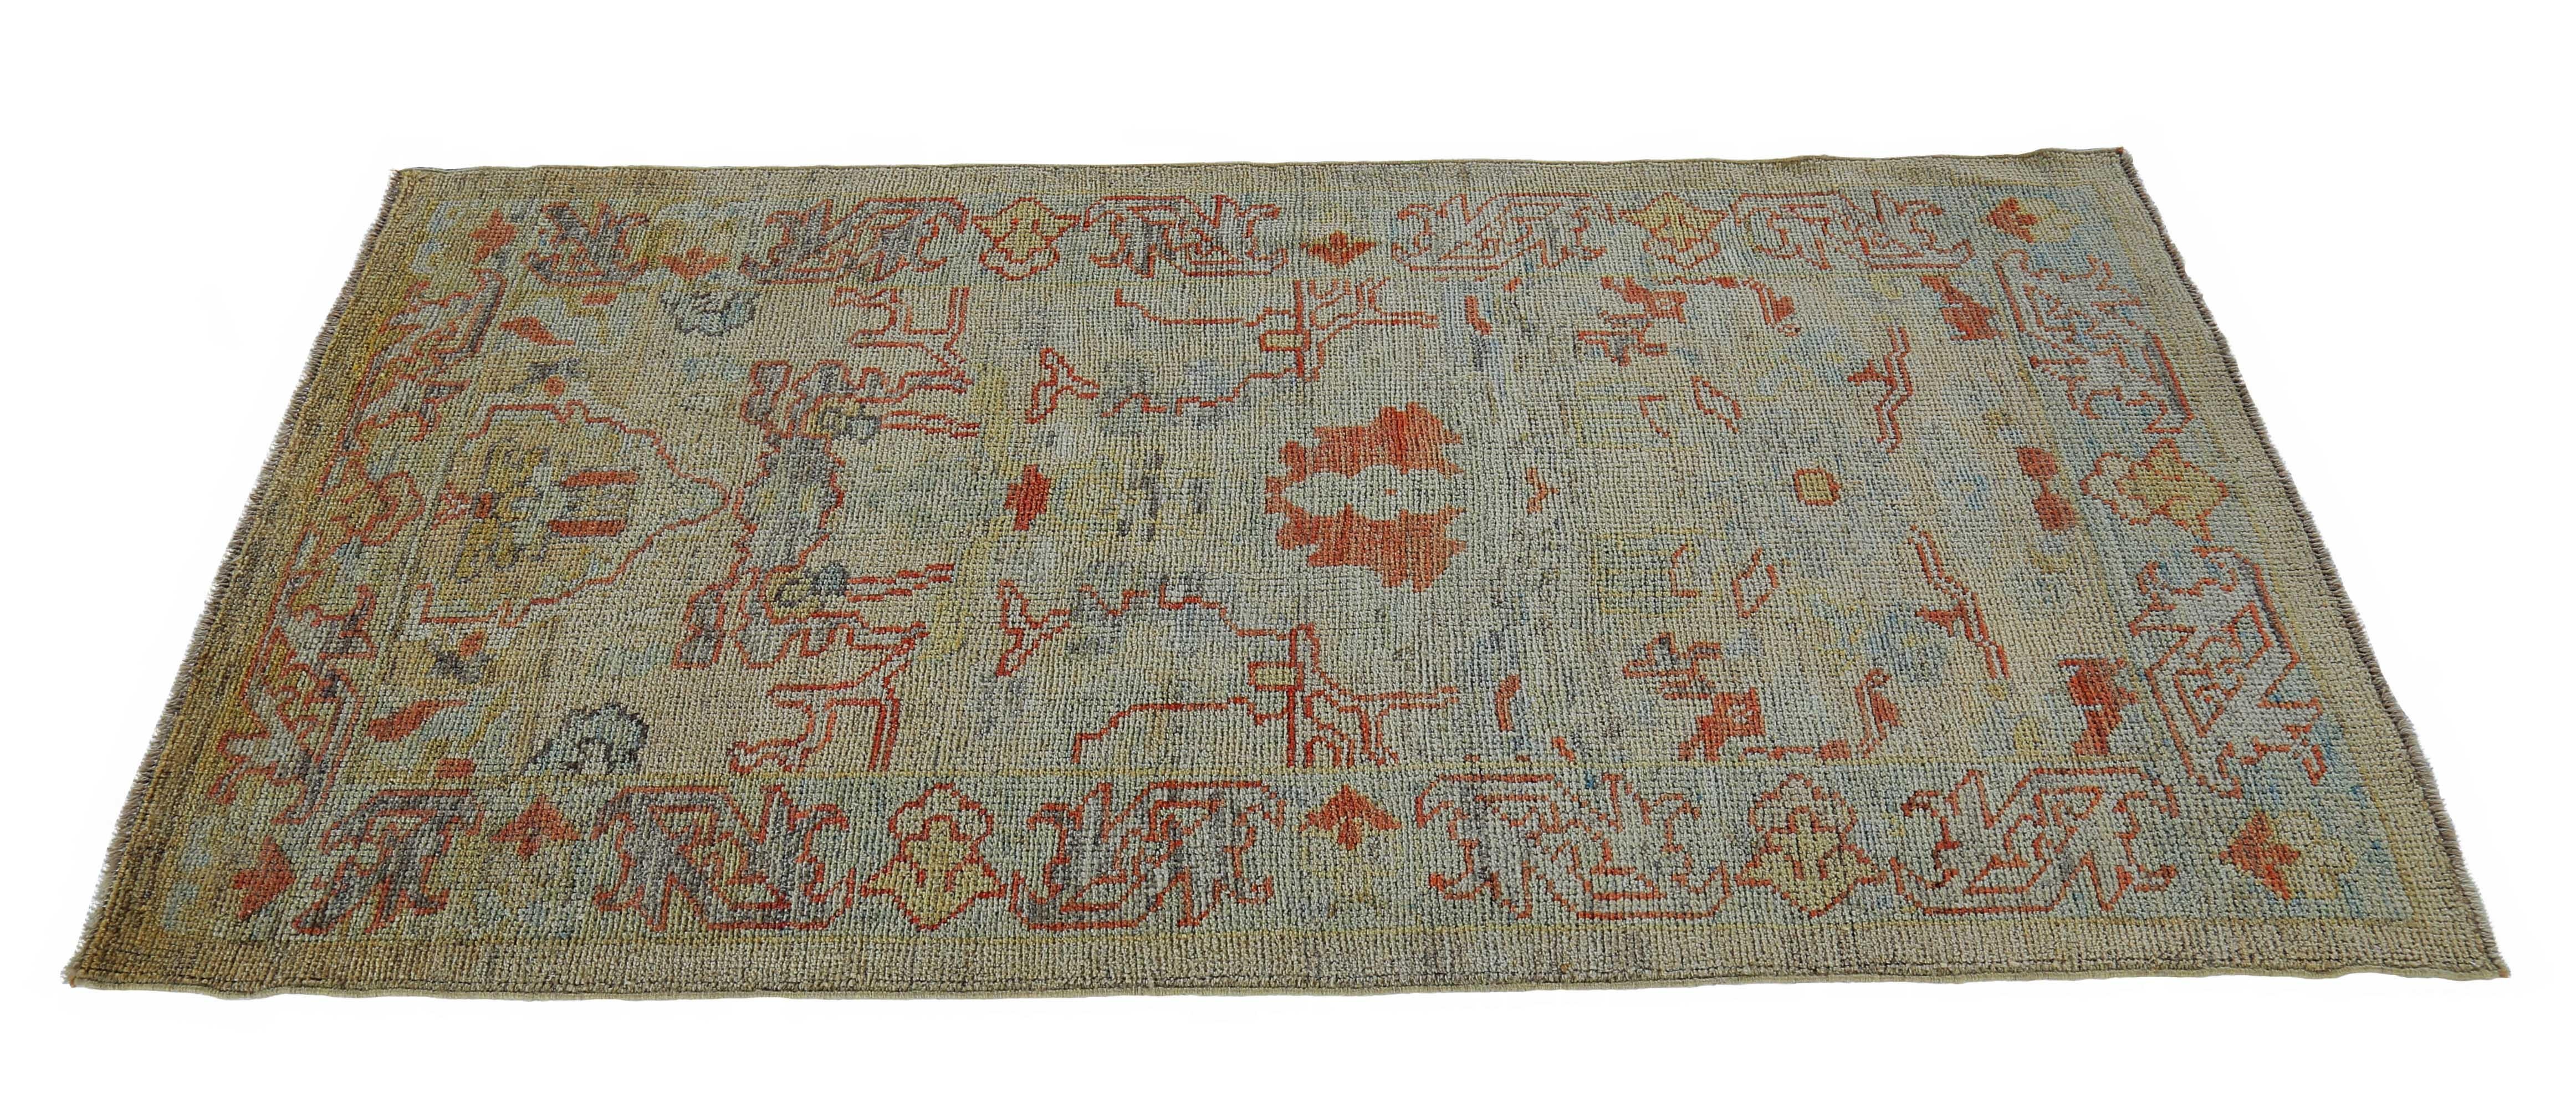 New Turkish rug made of handwoven sheep’s wool of the finest quality. It’s colored with organic vegetable dyes that are certified safe for humans and pets alike. It features blue and rust floral details on an ivory field. Flower patterns are